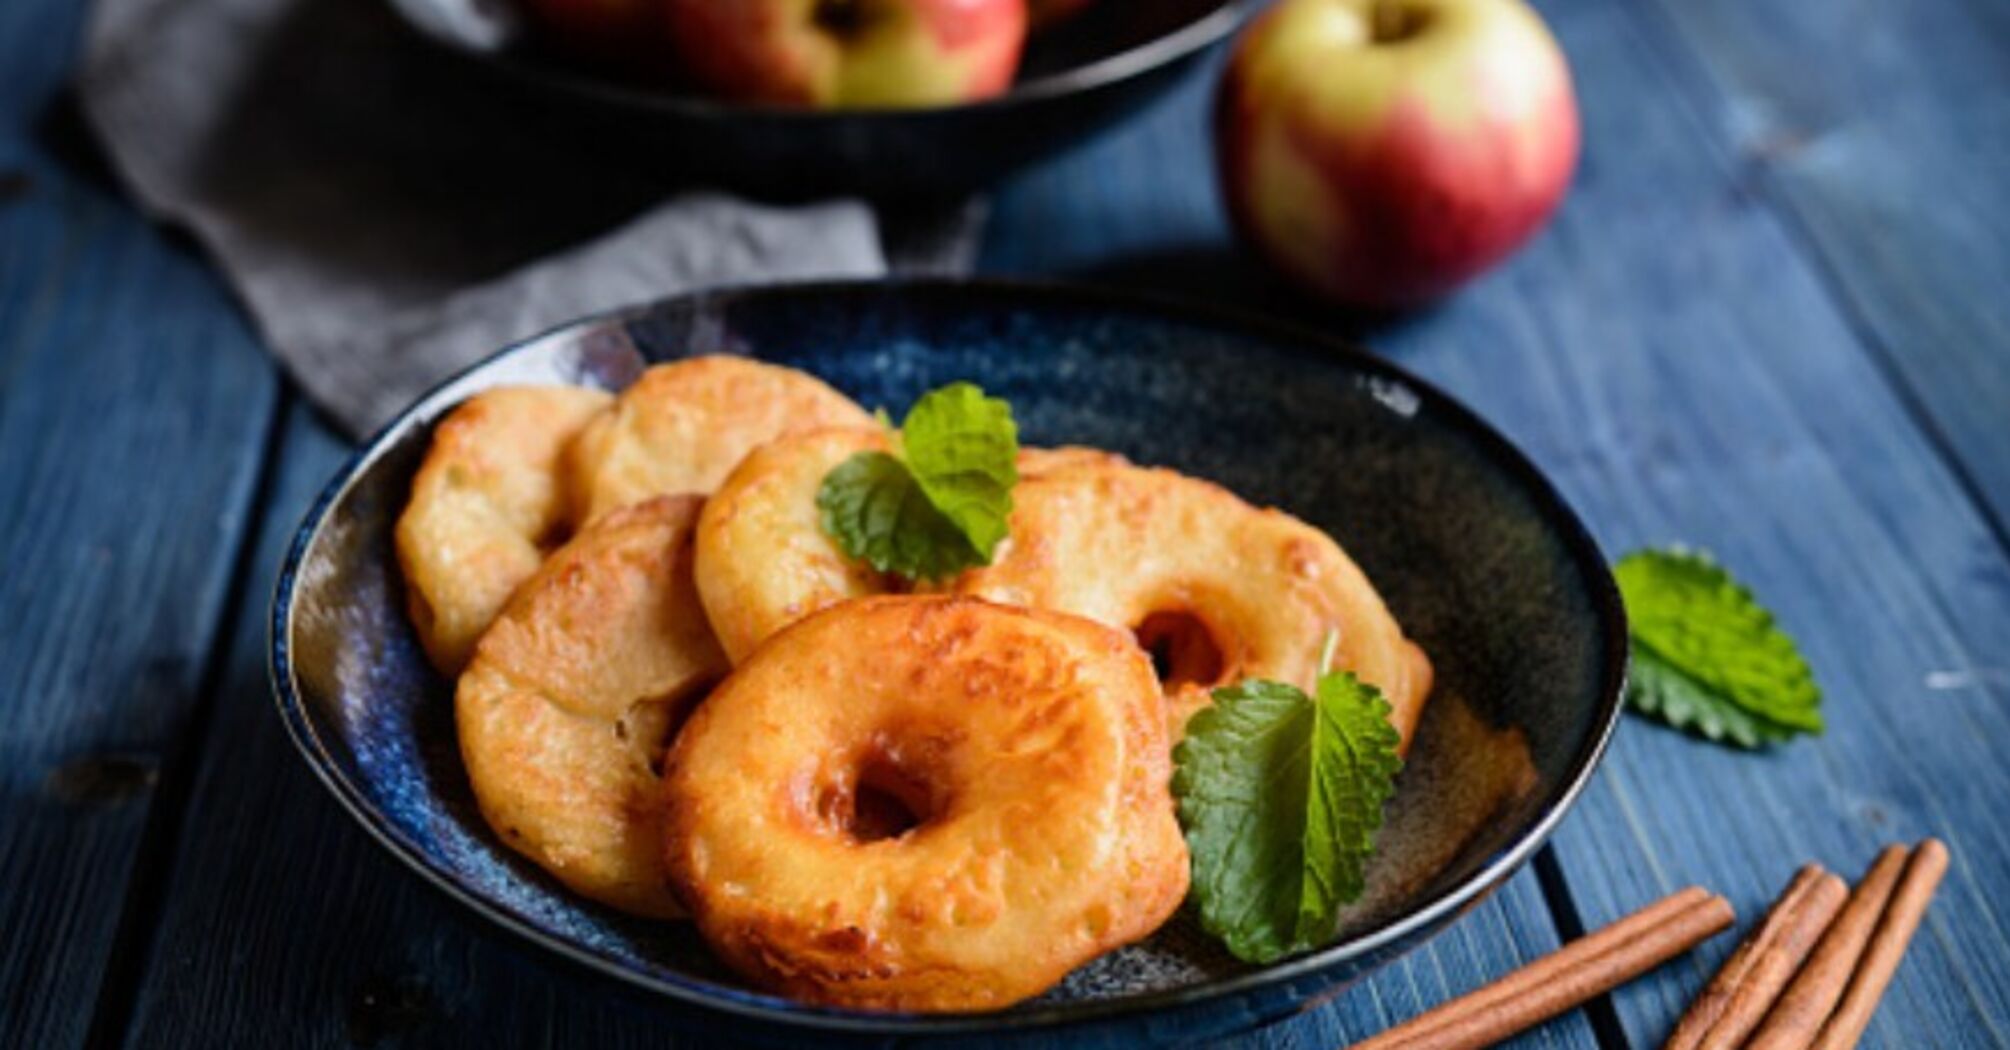 Battered apples according to an old recipe: no-bake dessert in 15 minutes